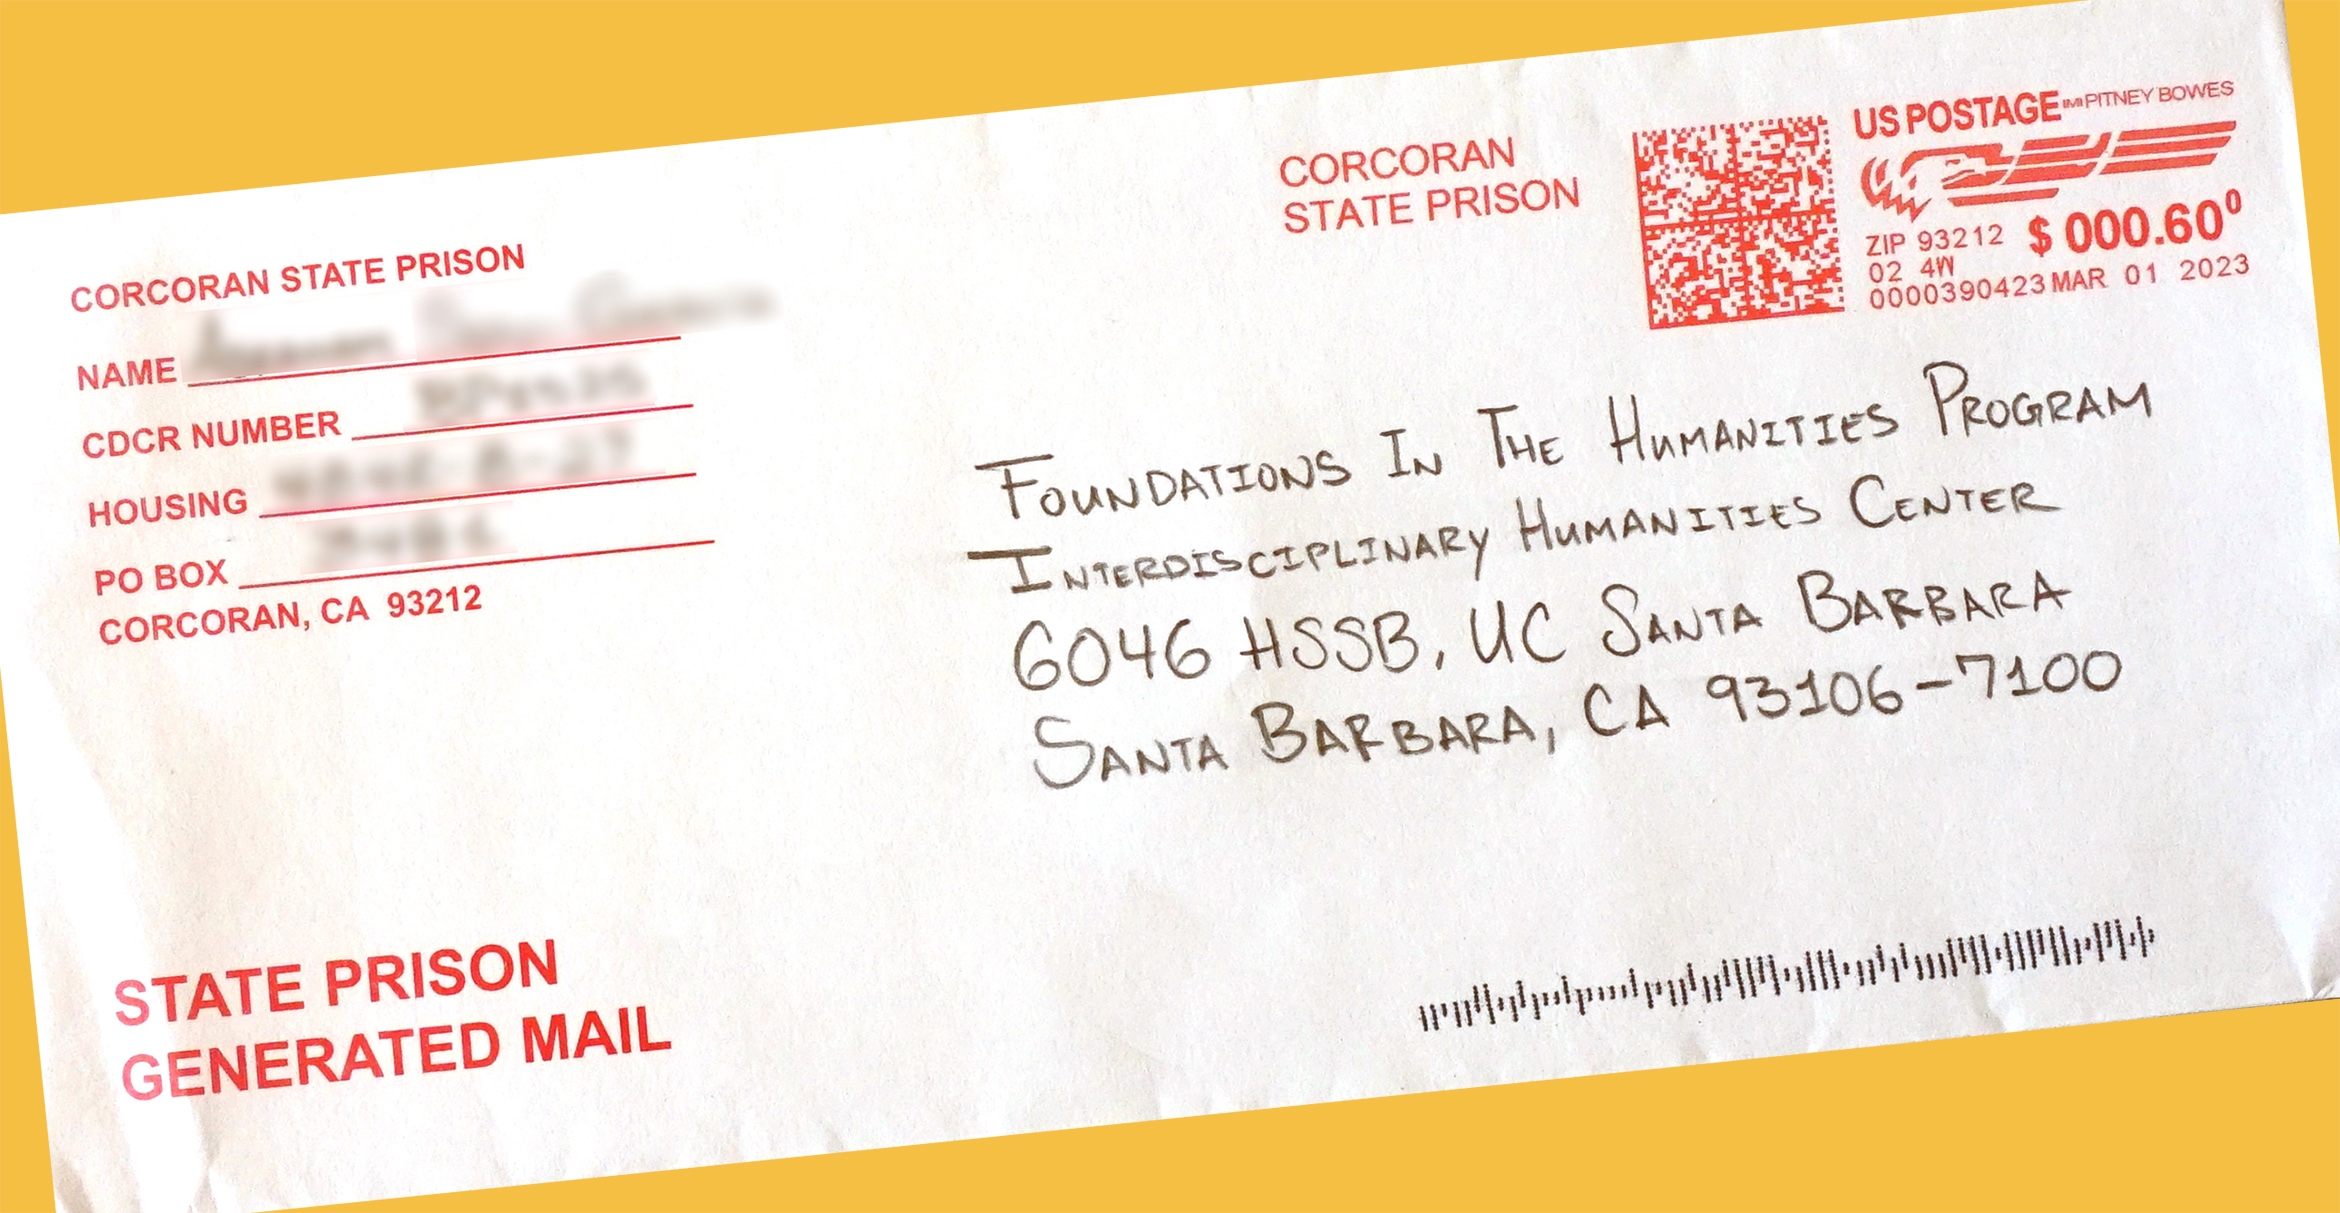 An envelope addressed to UCSB's Interdisciplinary Humanities Center, from Corcoran State Prison